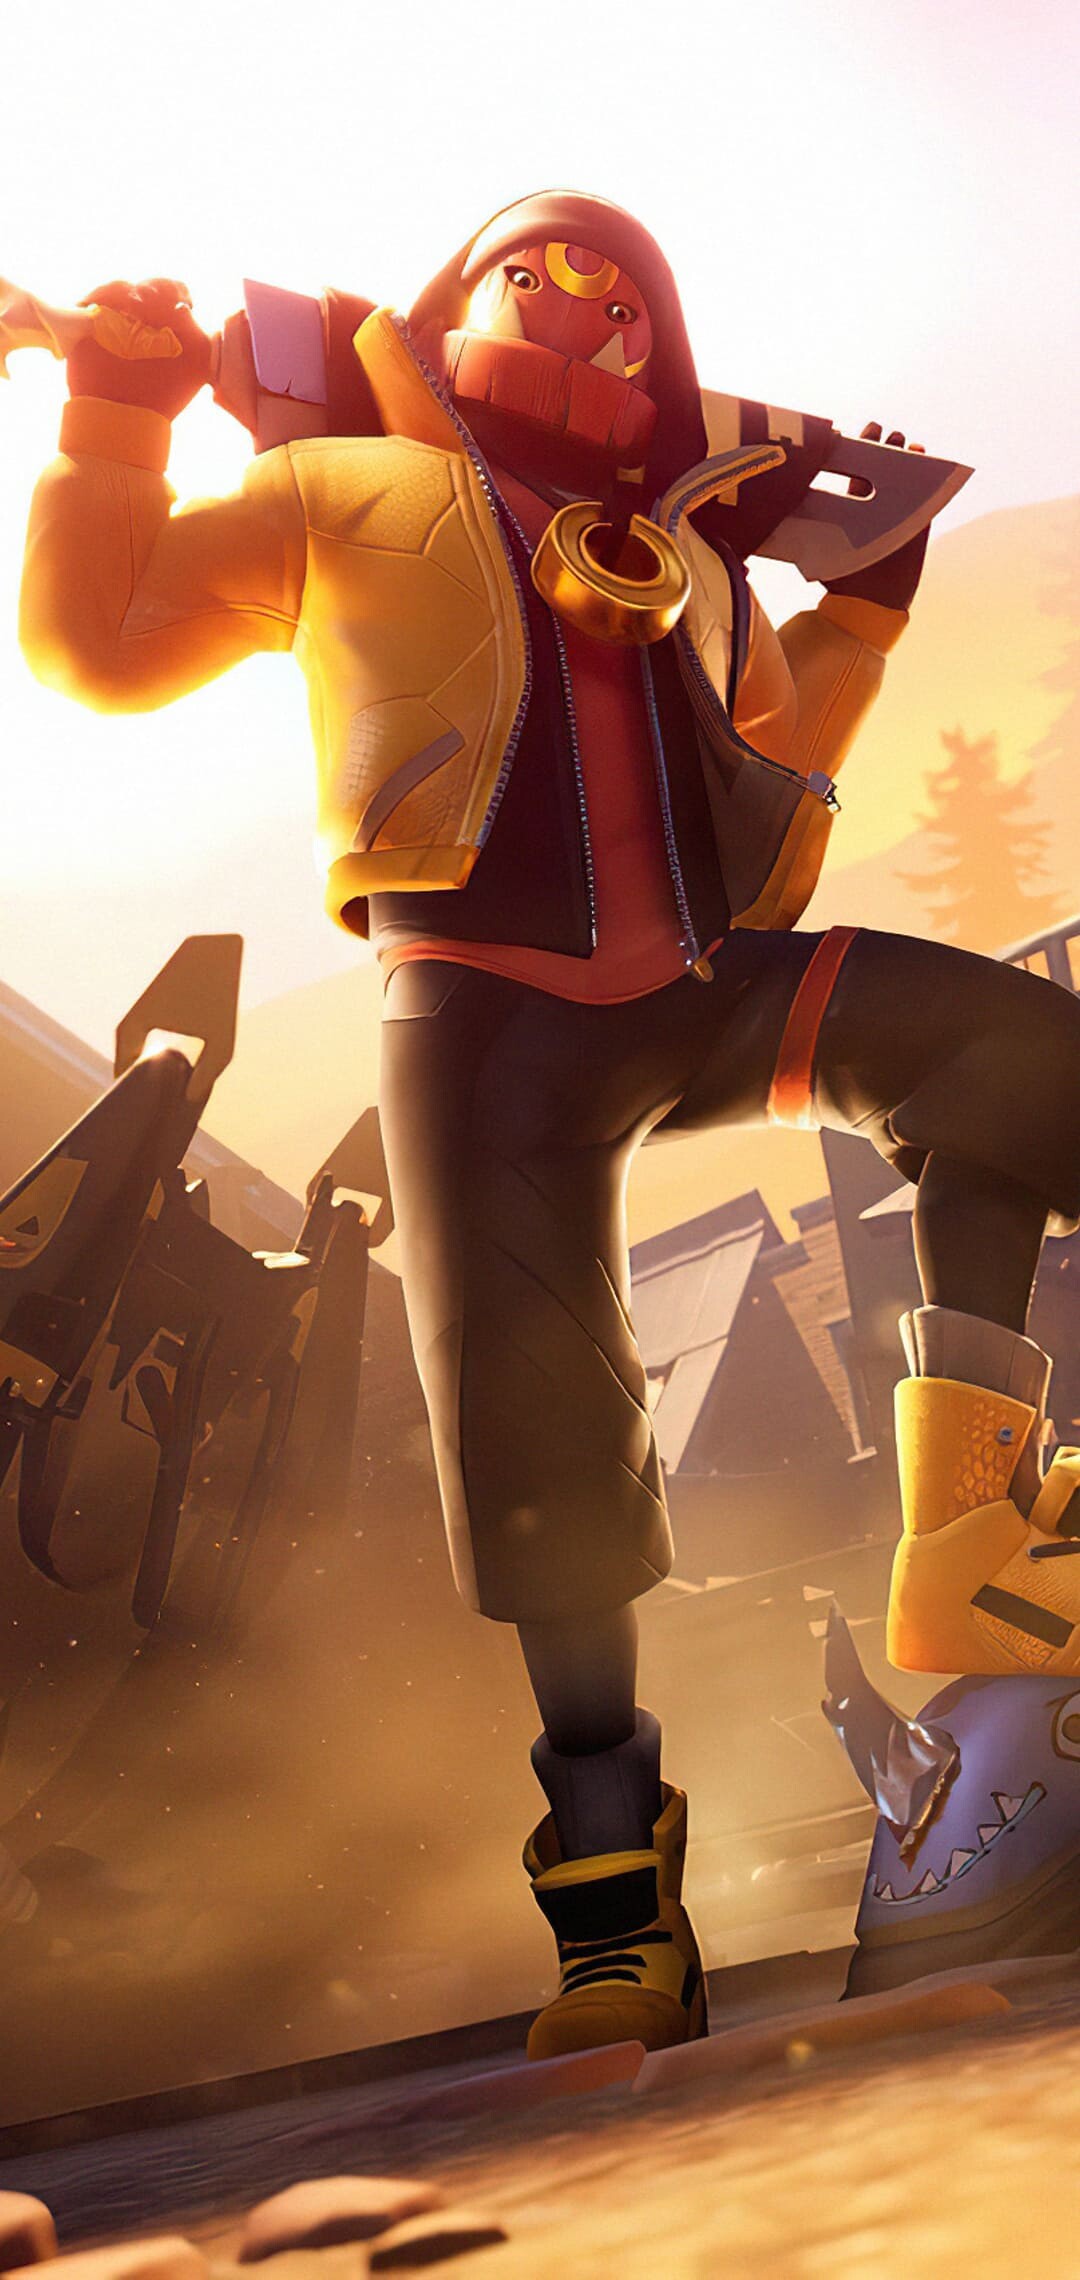 Fortnite: A third-person shooter game where up to 100 players compete to be the last person or team standing. 1080x2280 HD Wallpaper.